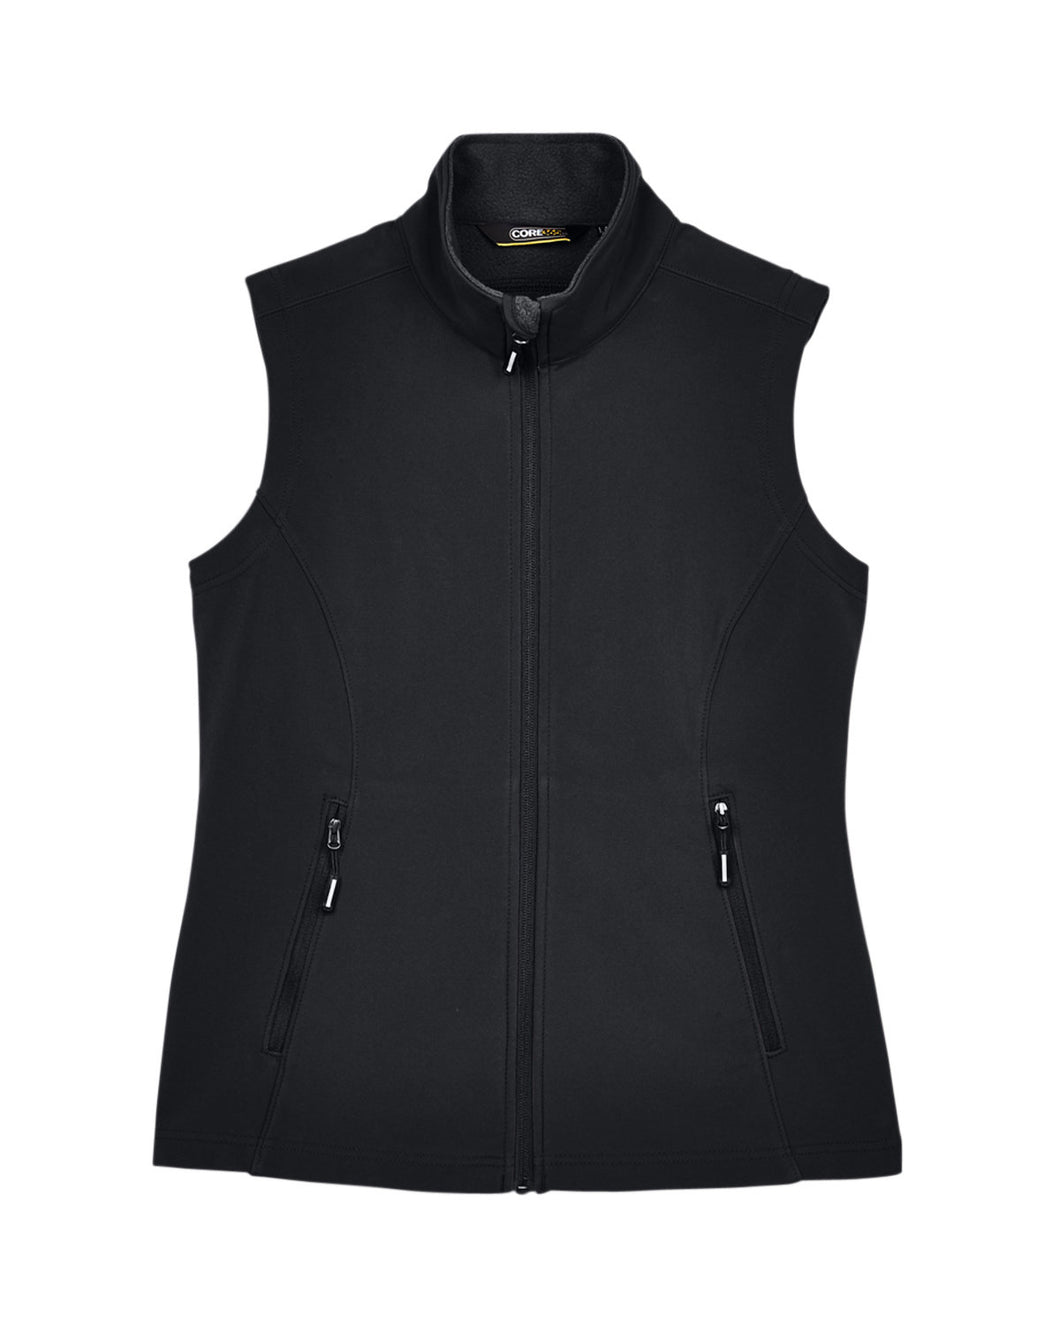 Ladies' Cruise Two-Layer Fleece Bonded Soft Shell Vest